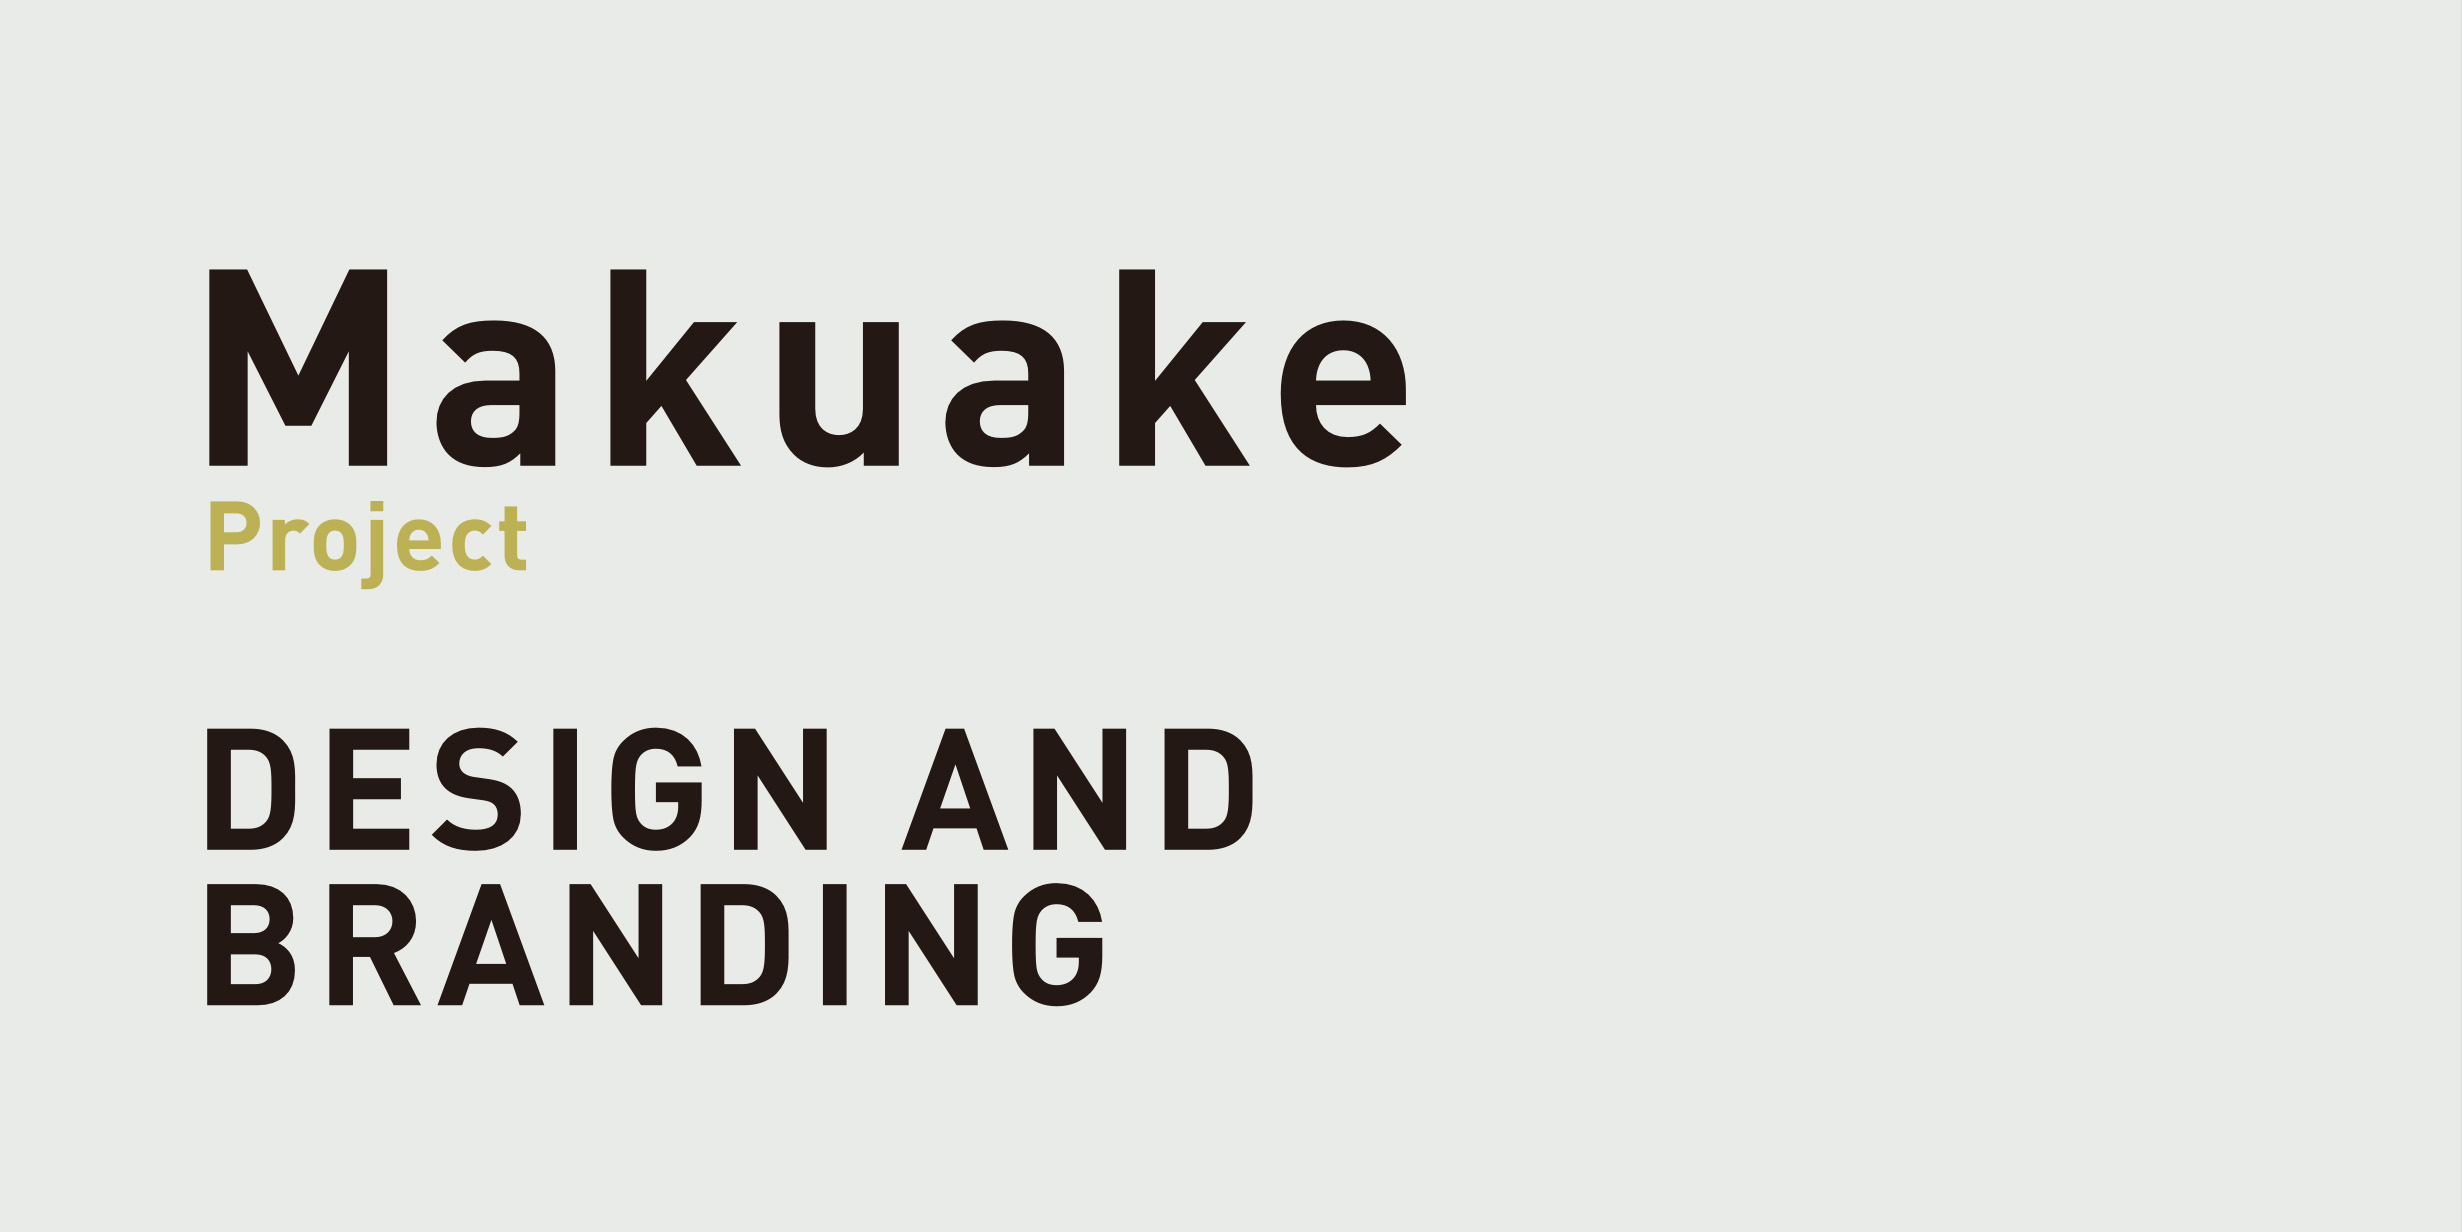 makuake project design and branding